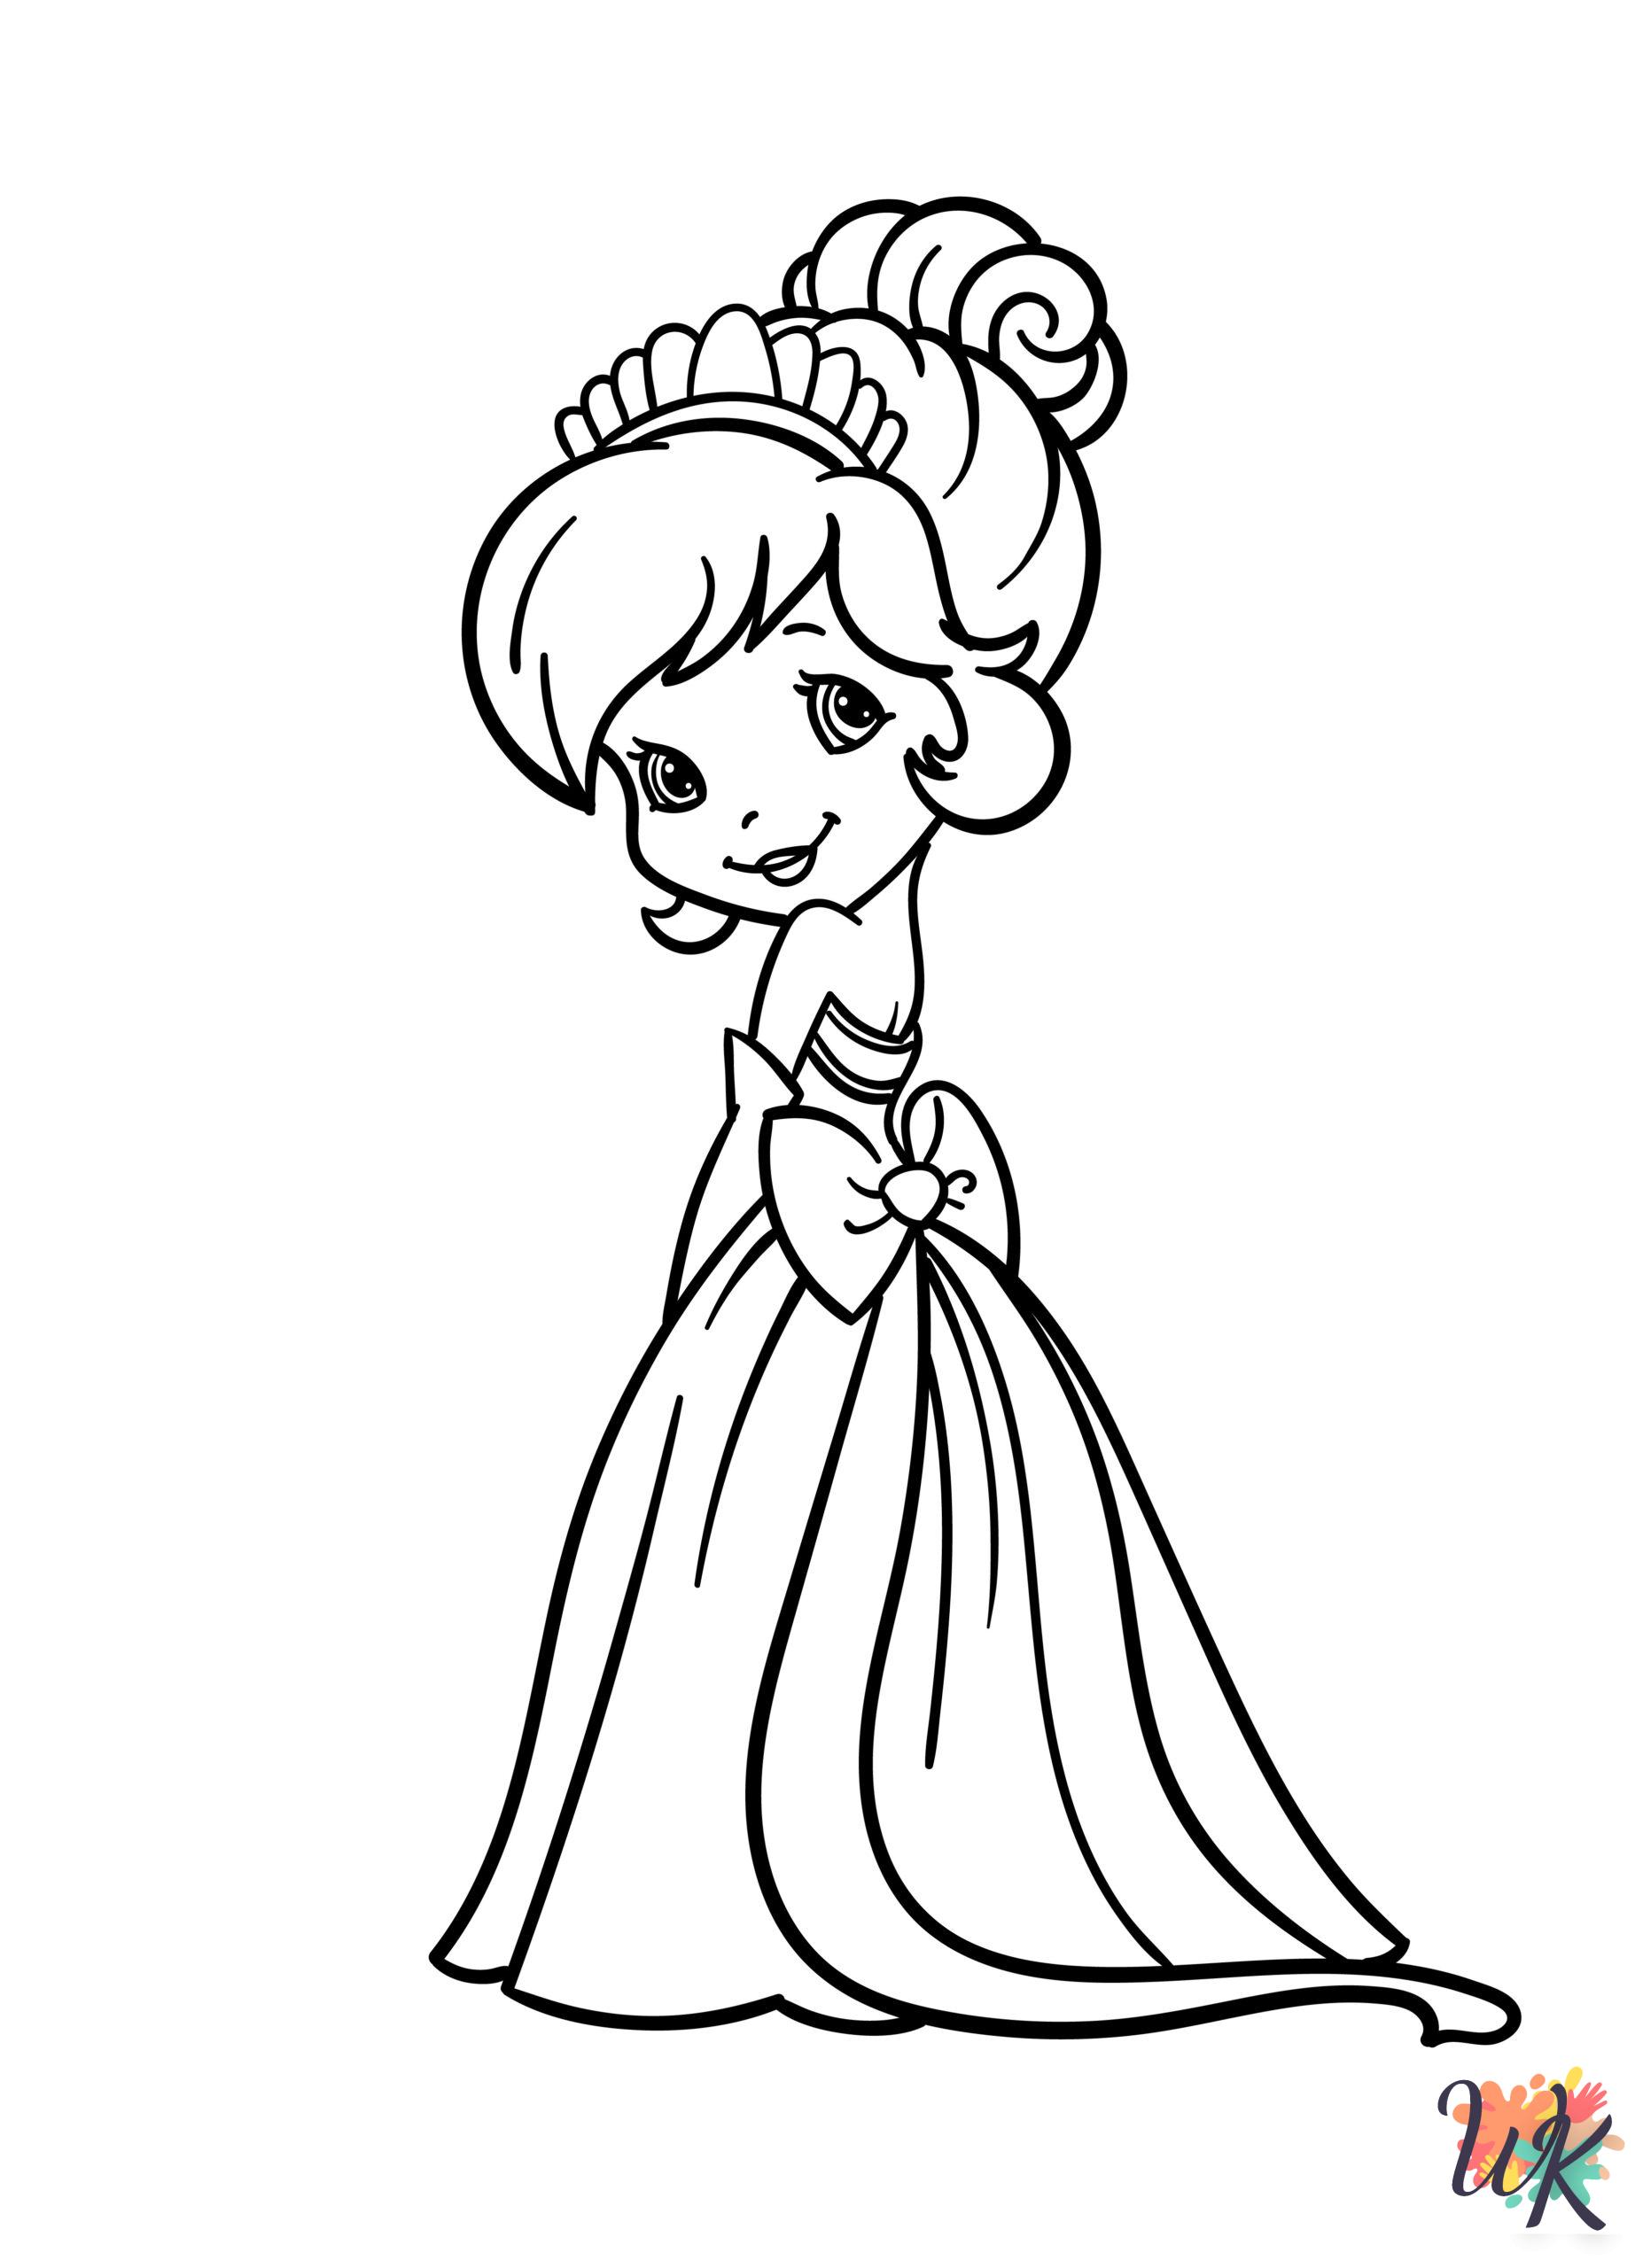 merry Strawberry Shortcake coloring pages